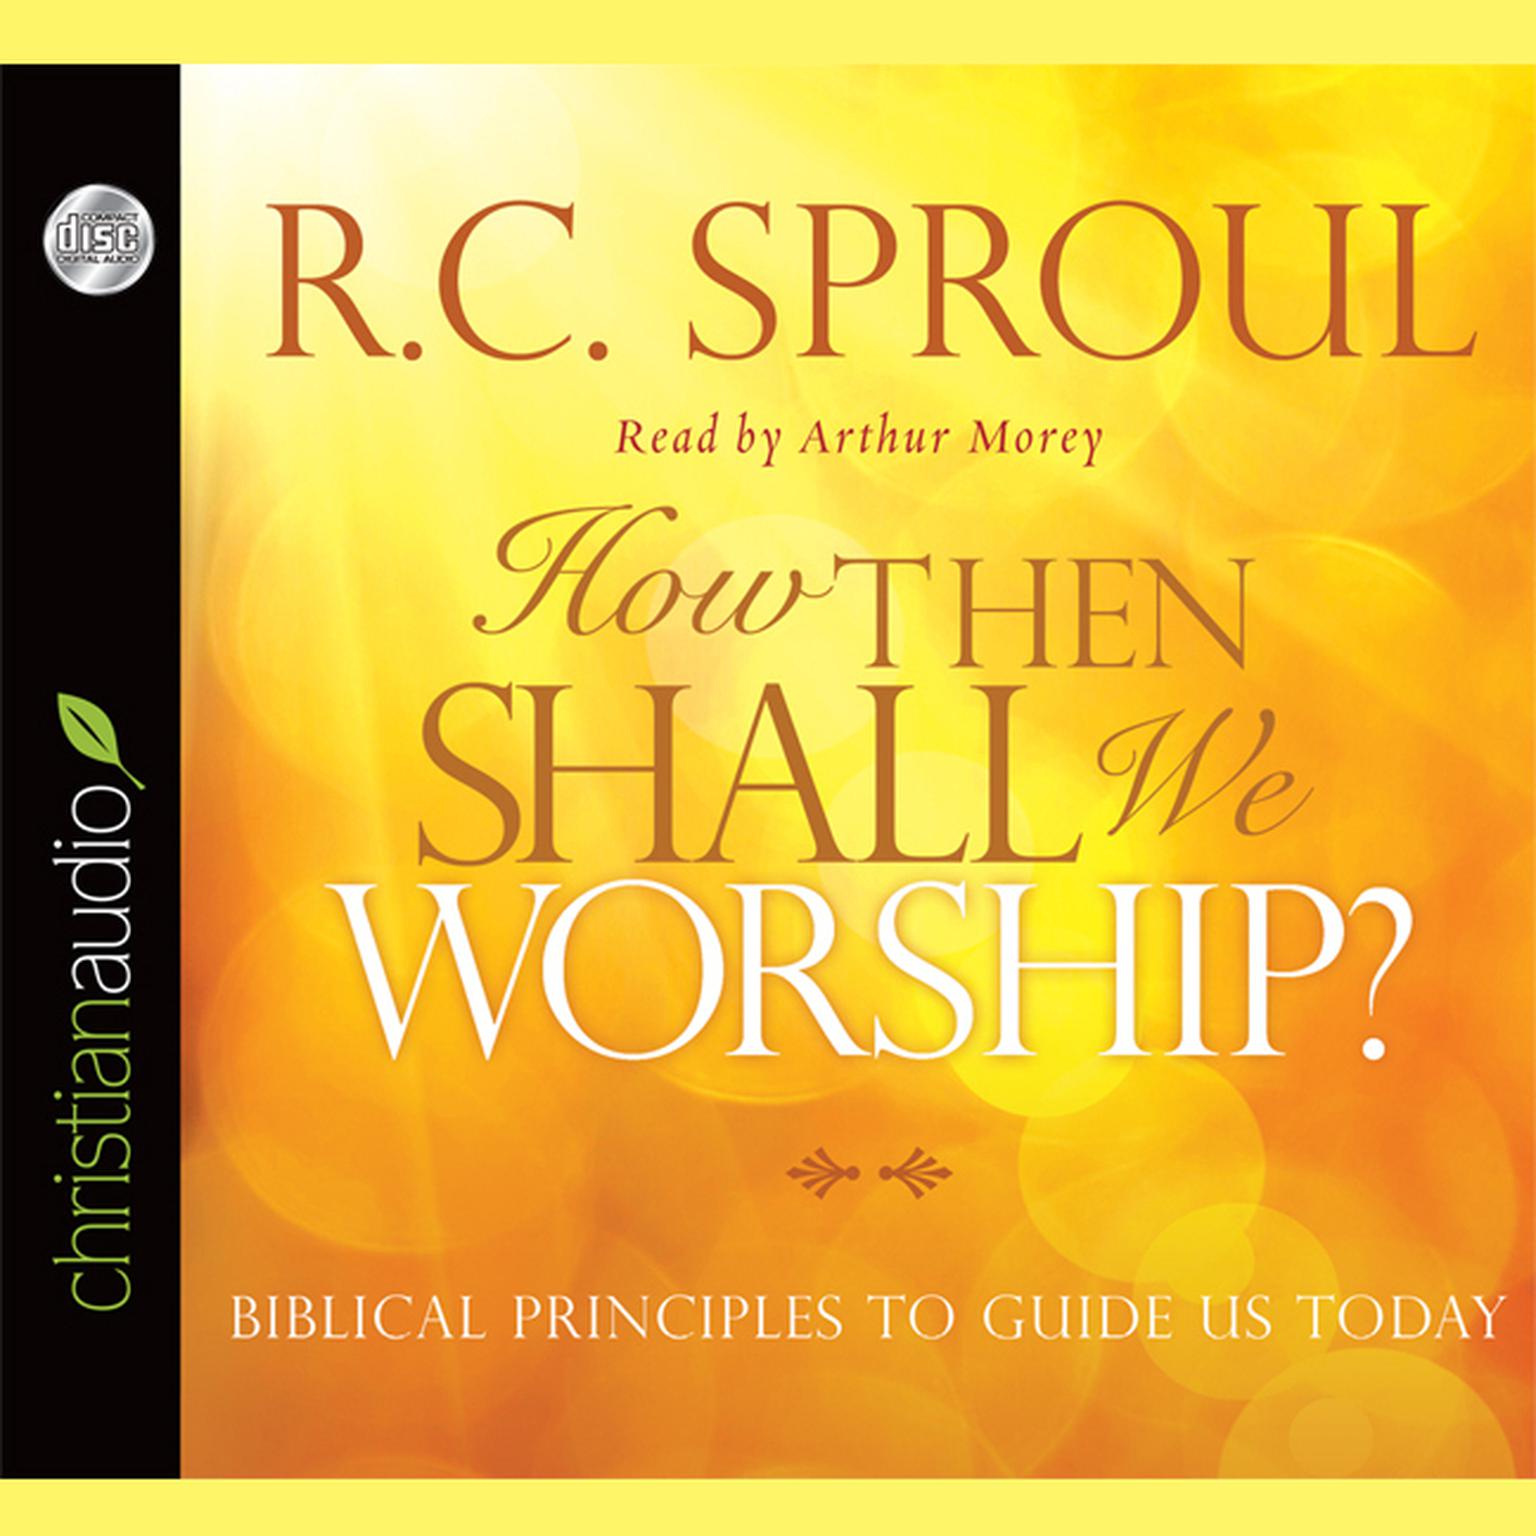 How Then Shall We Worship?: Biblical Principles to Guide Us Today Audiobook, by R. C. Sproul